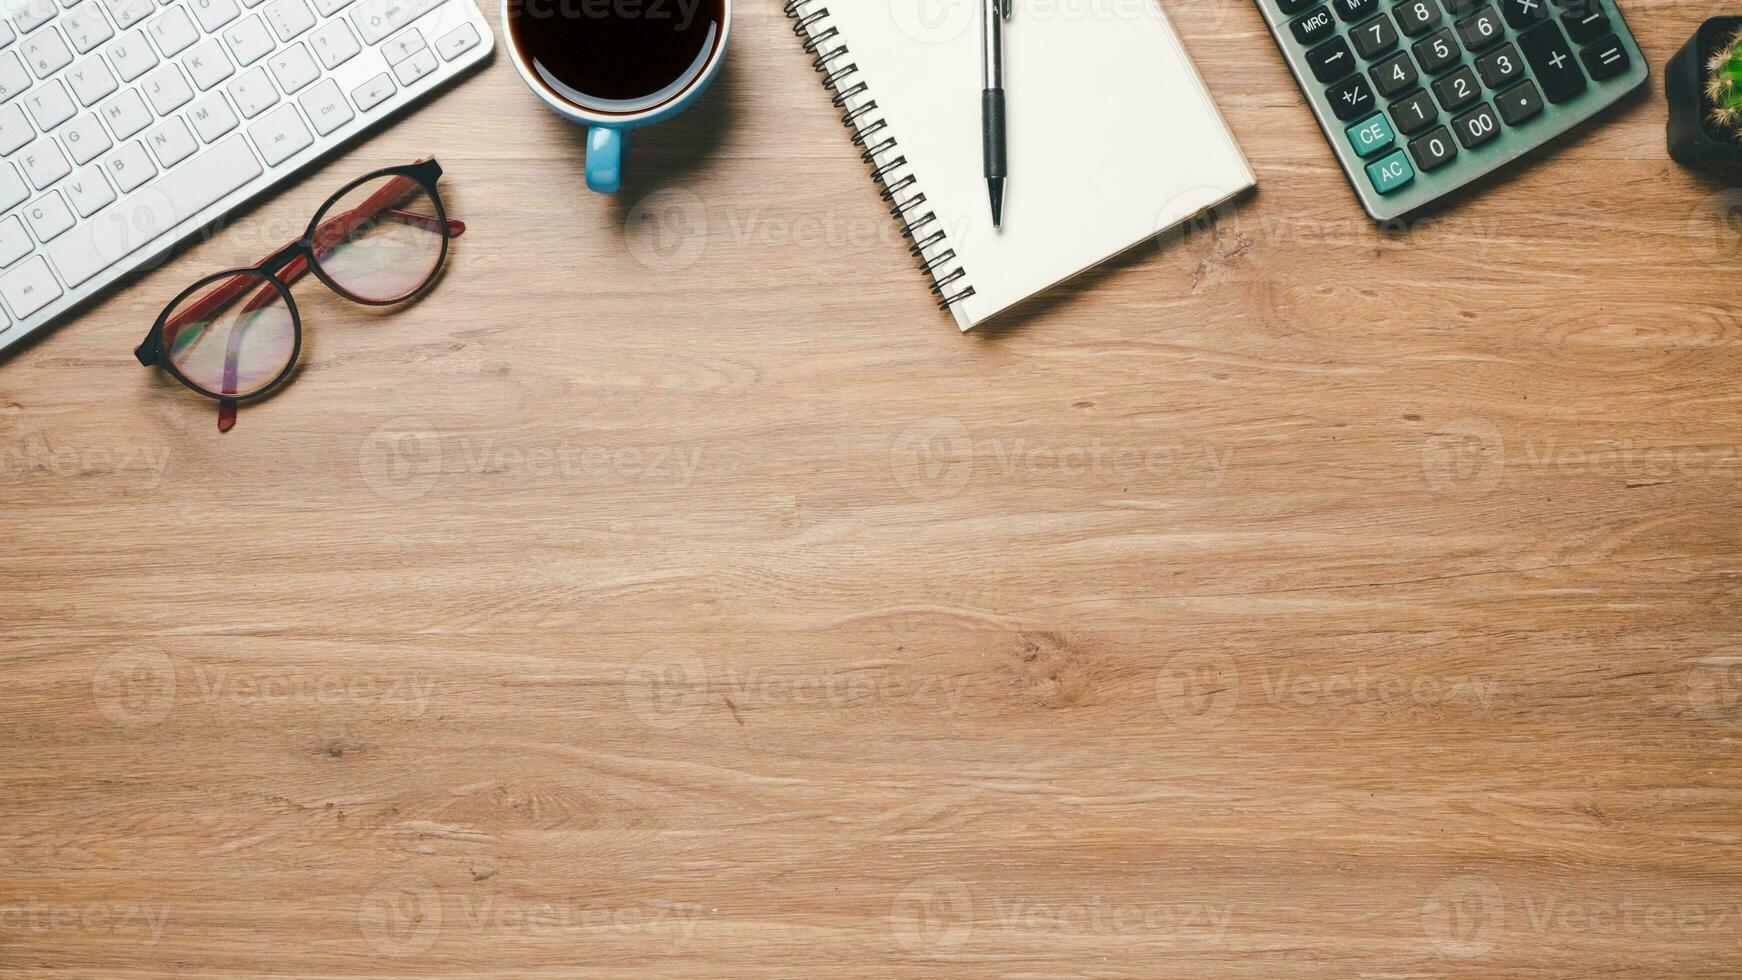 Top view, Office wooden desk with keyboard, notebook, pen, eyeglass, calculator and cup of coffee, copy space, Mock up. photo